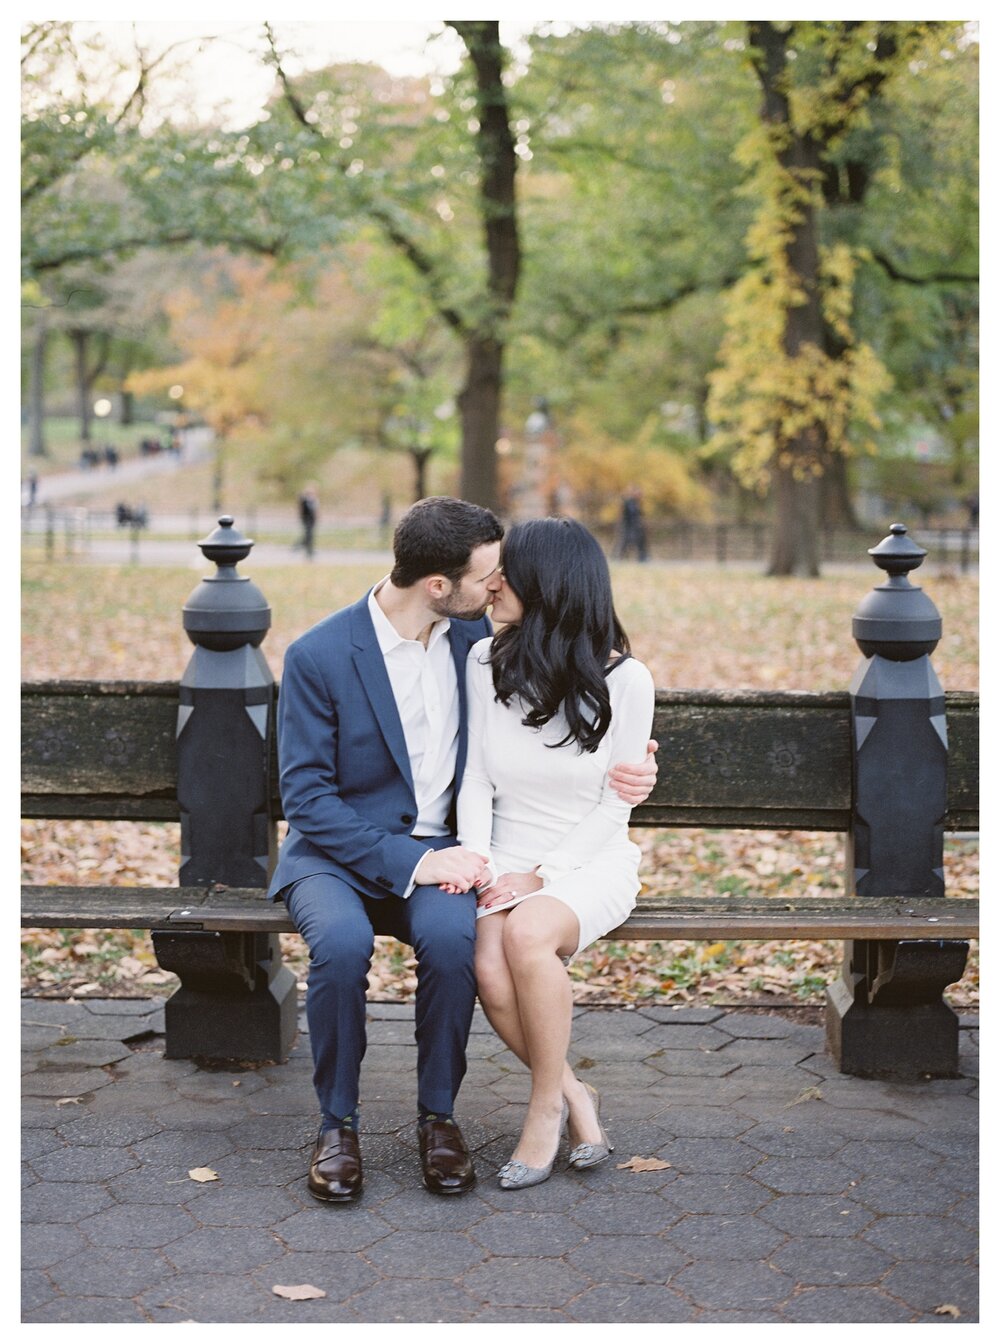  Fall engagement photos in central park couple sitting on a bench kissing 